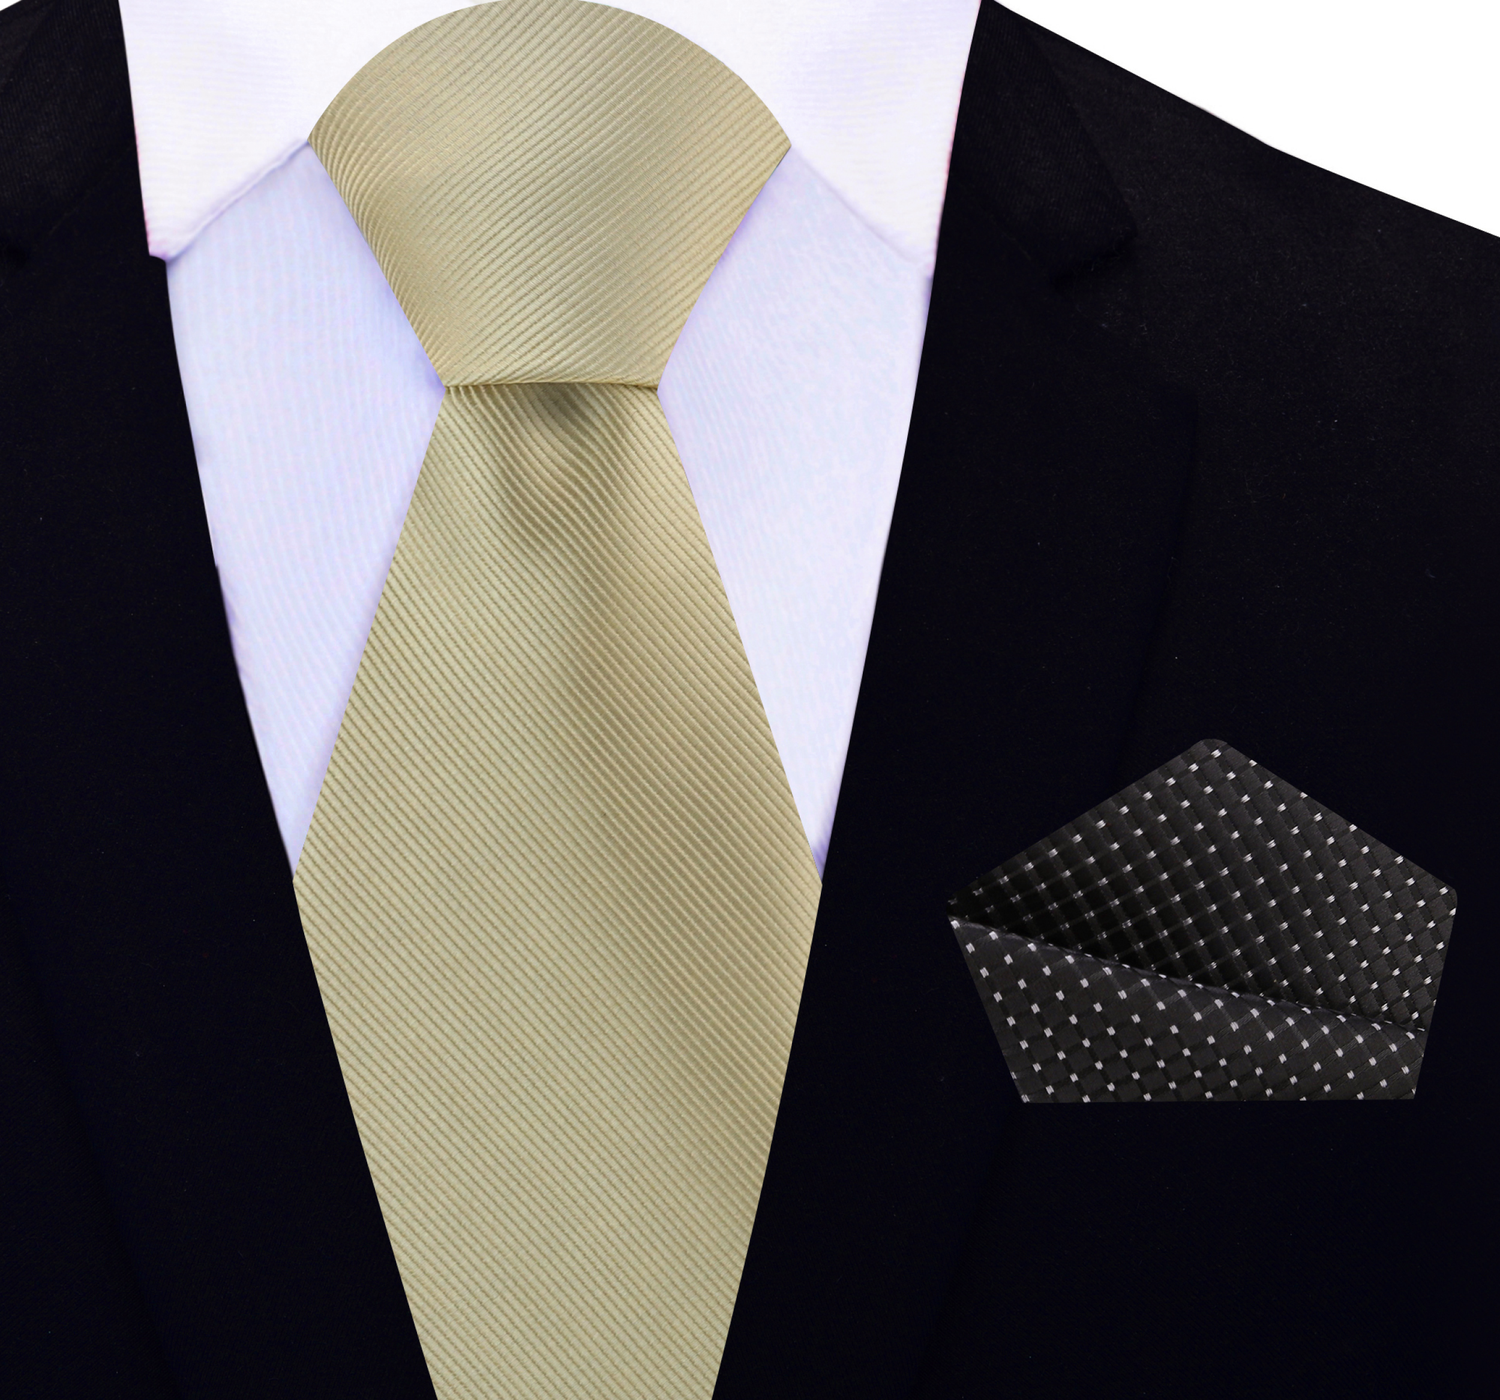 Main View: Solid Pale Gold Tie and Black Geometric Square